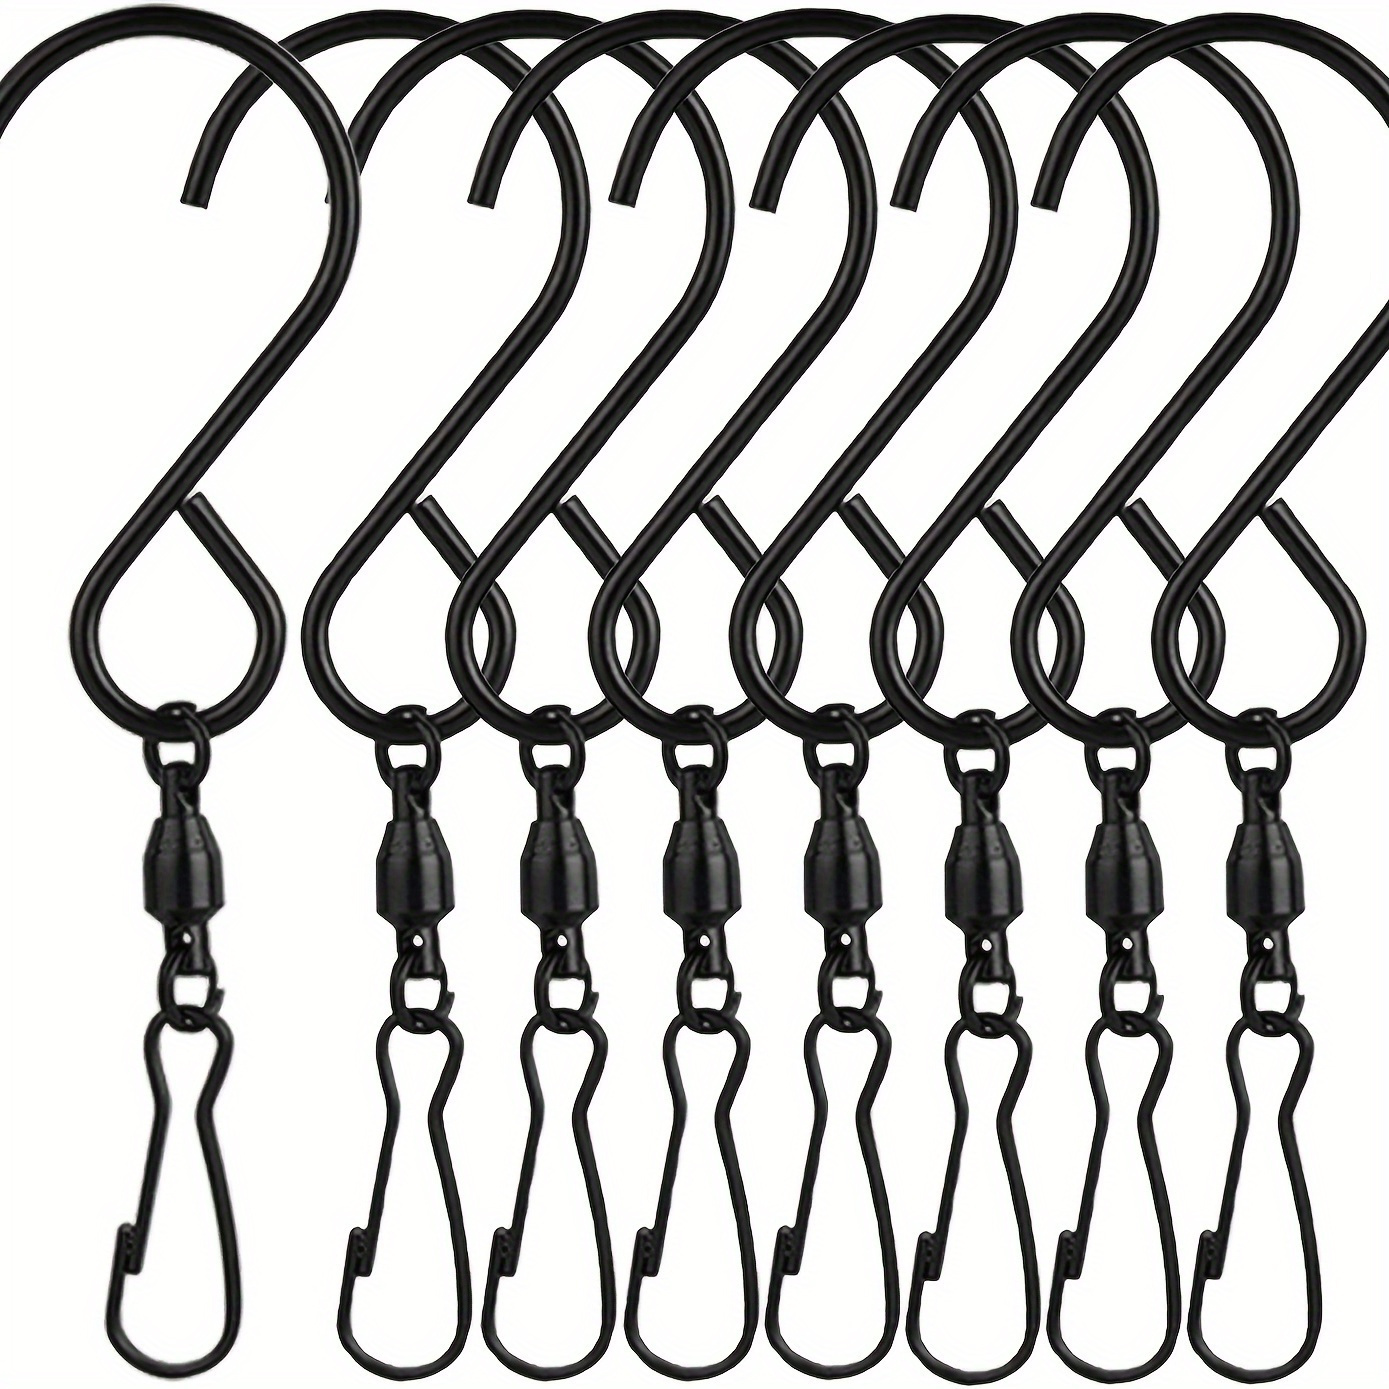 

5pcs Swivel Wind Chime Hooks Stainless Steel Swivel Bearing Hooks For Hanging Wind Chimes, Bird Feeder, Crystal Party Supplies (black)